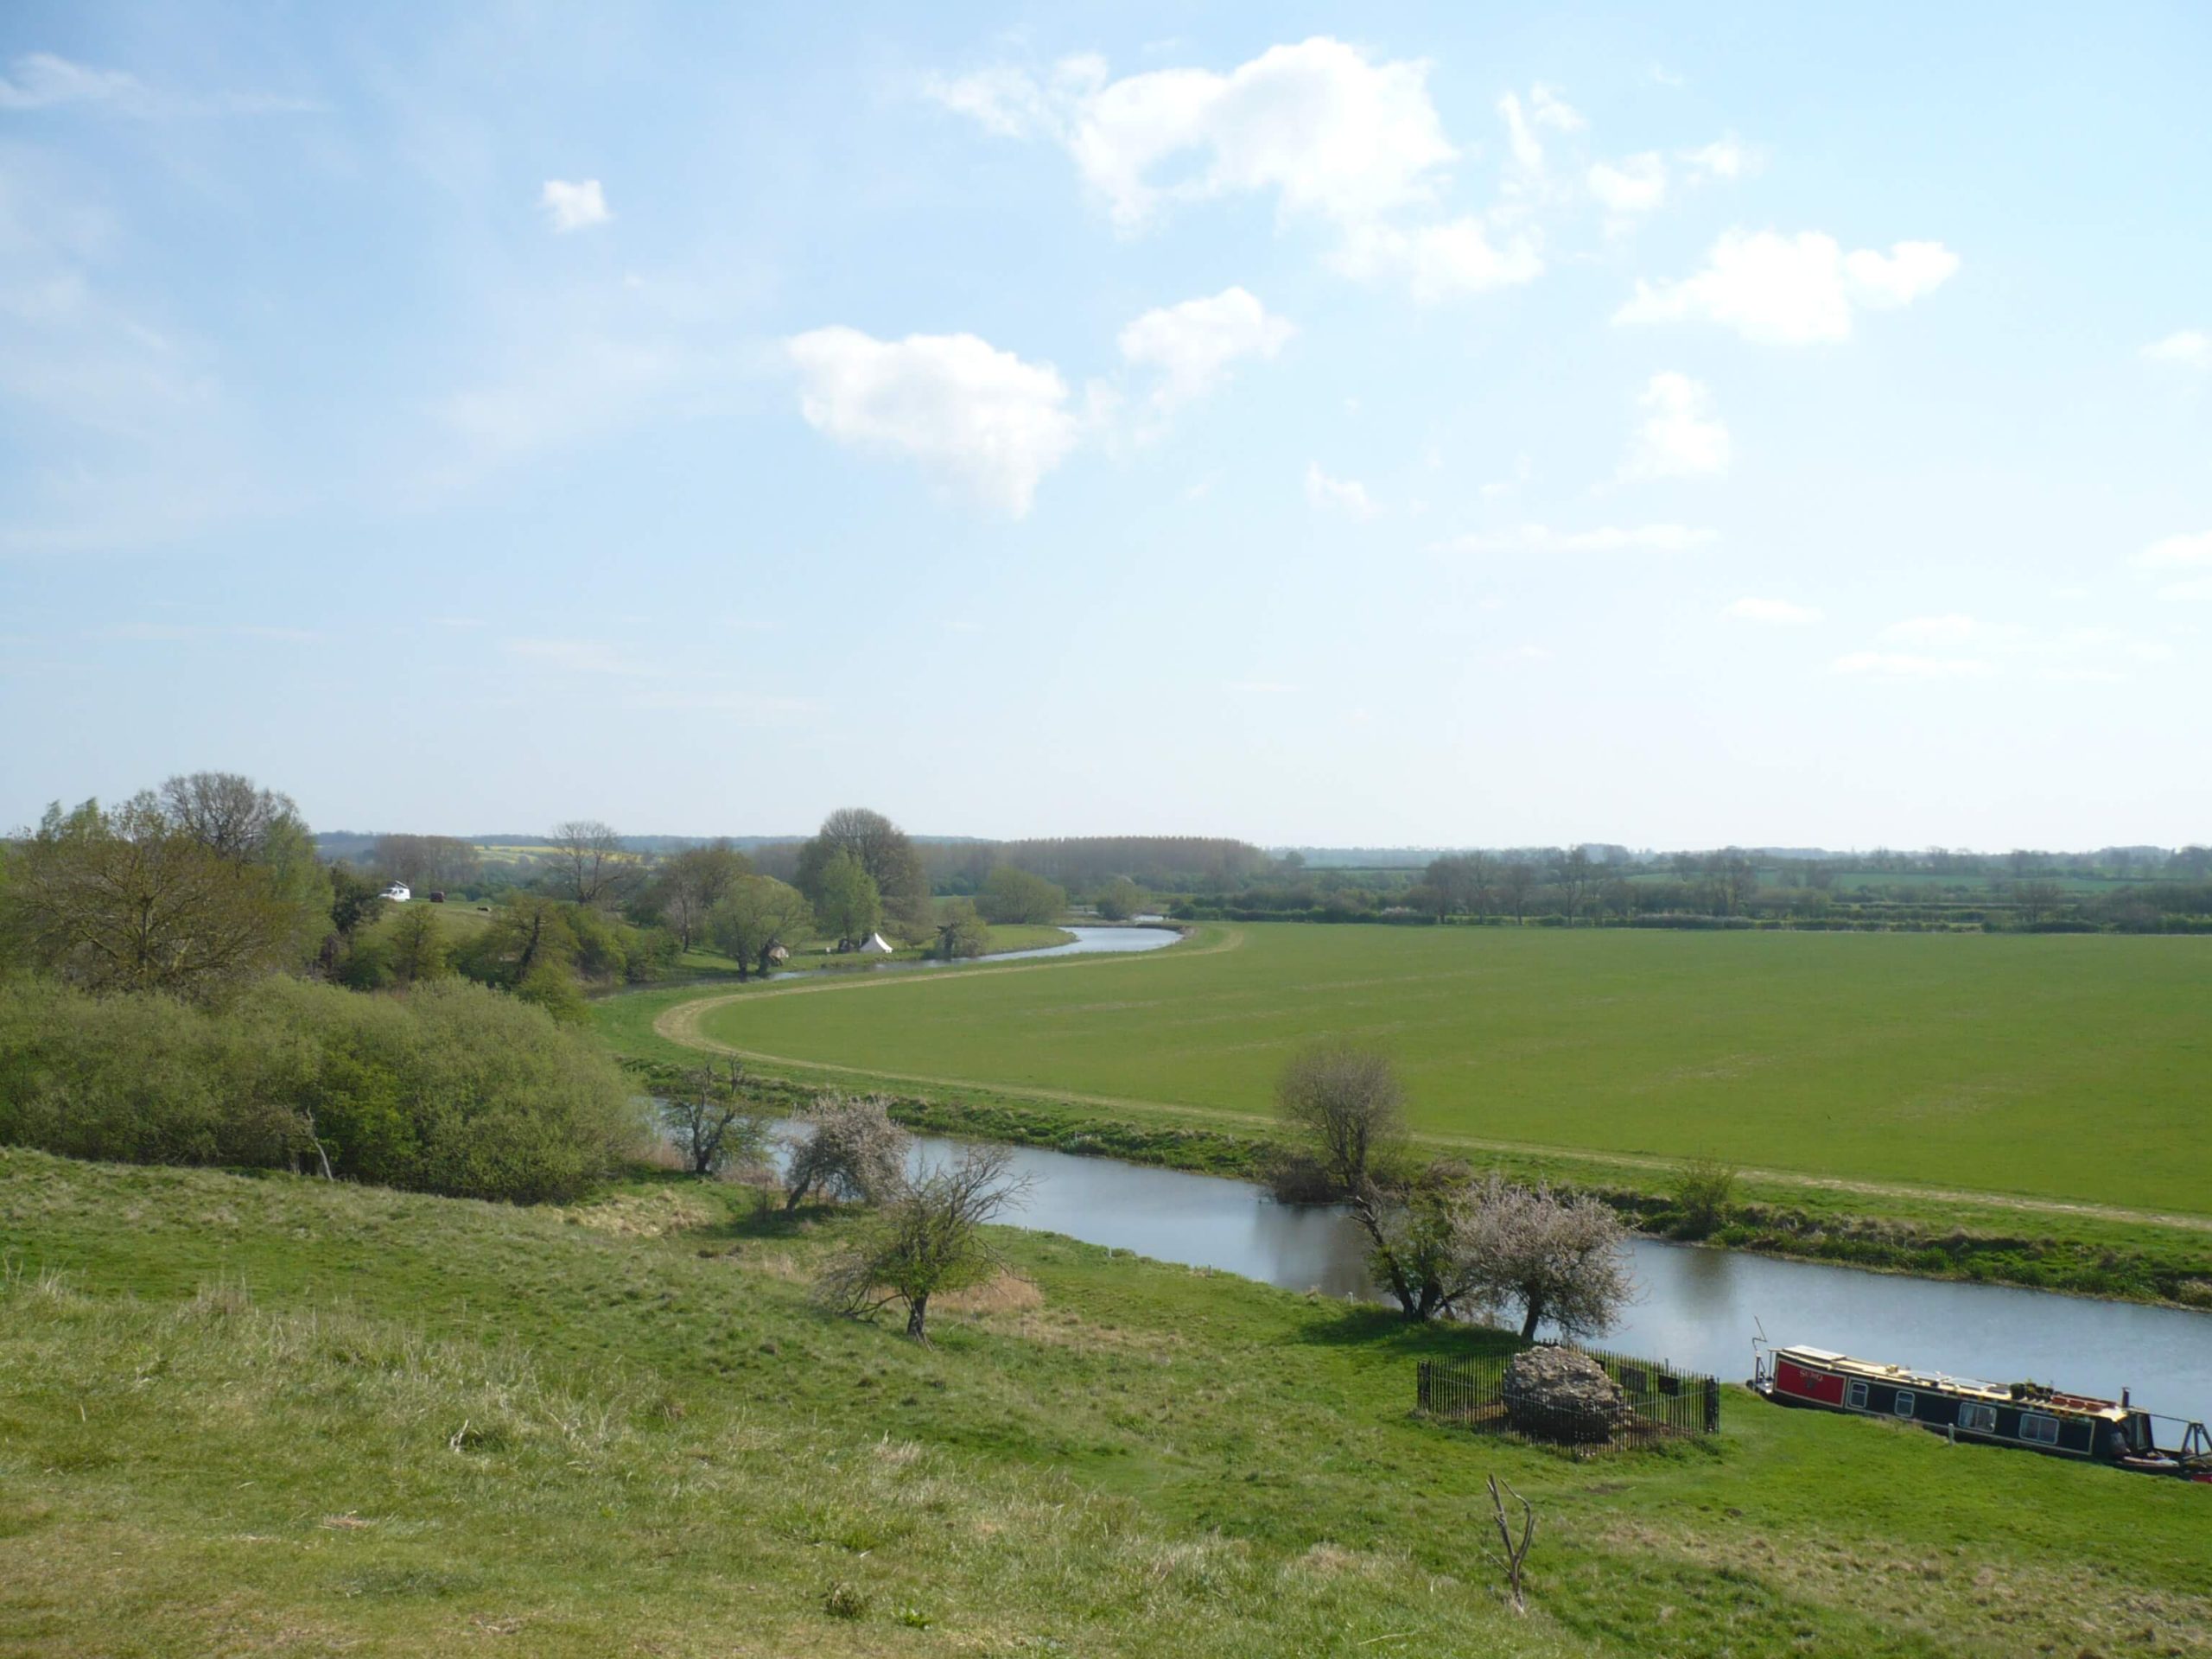 View of the River Nene from teh castle mound Fotheringhay